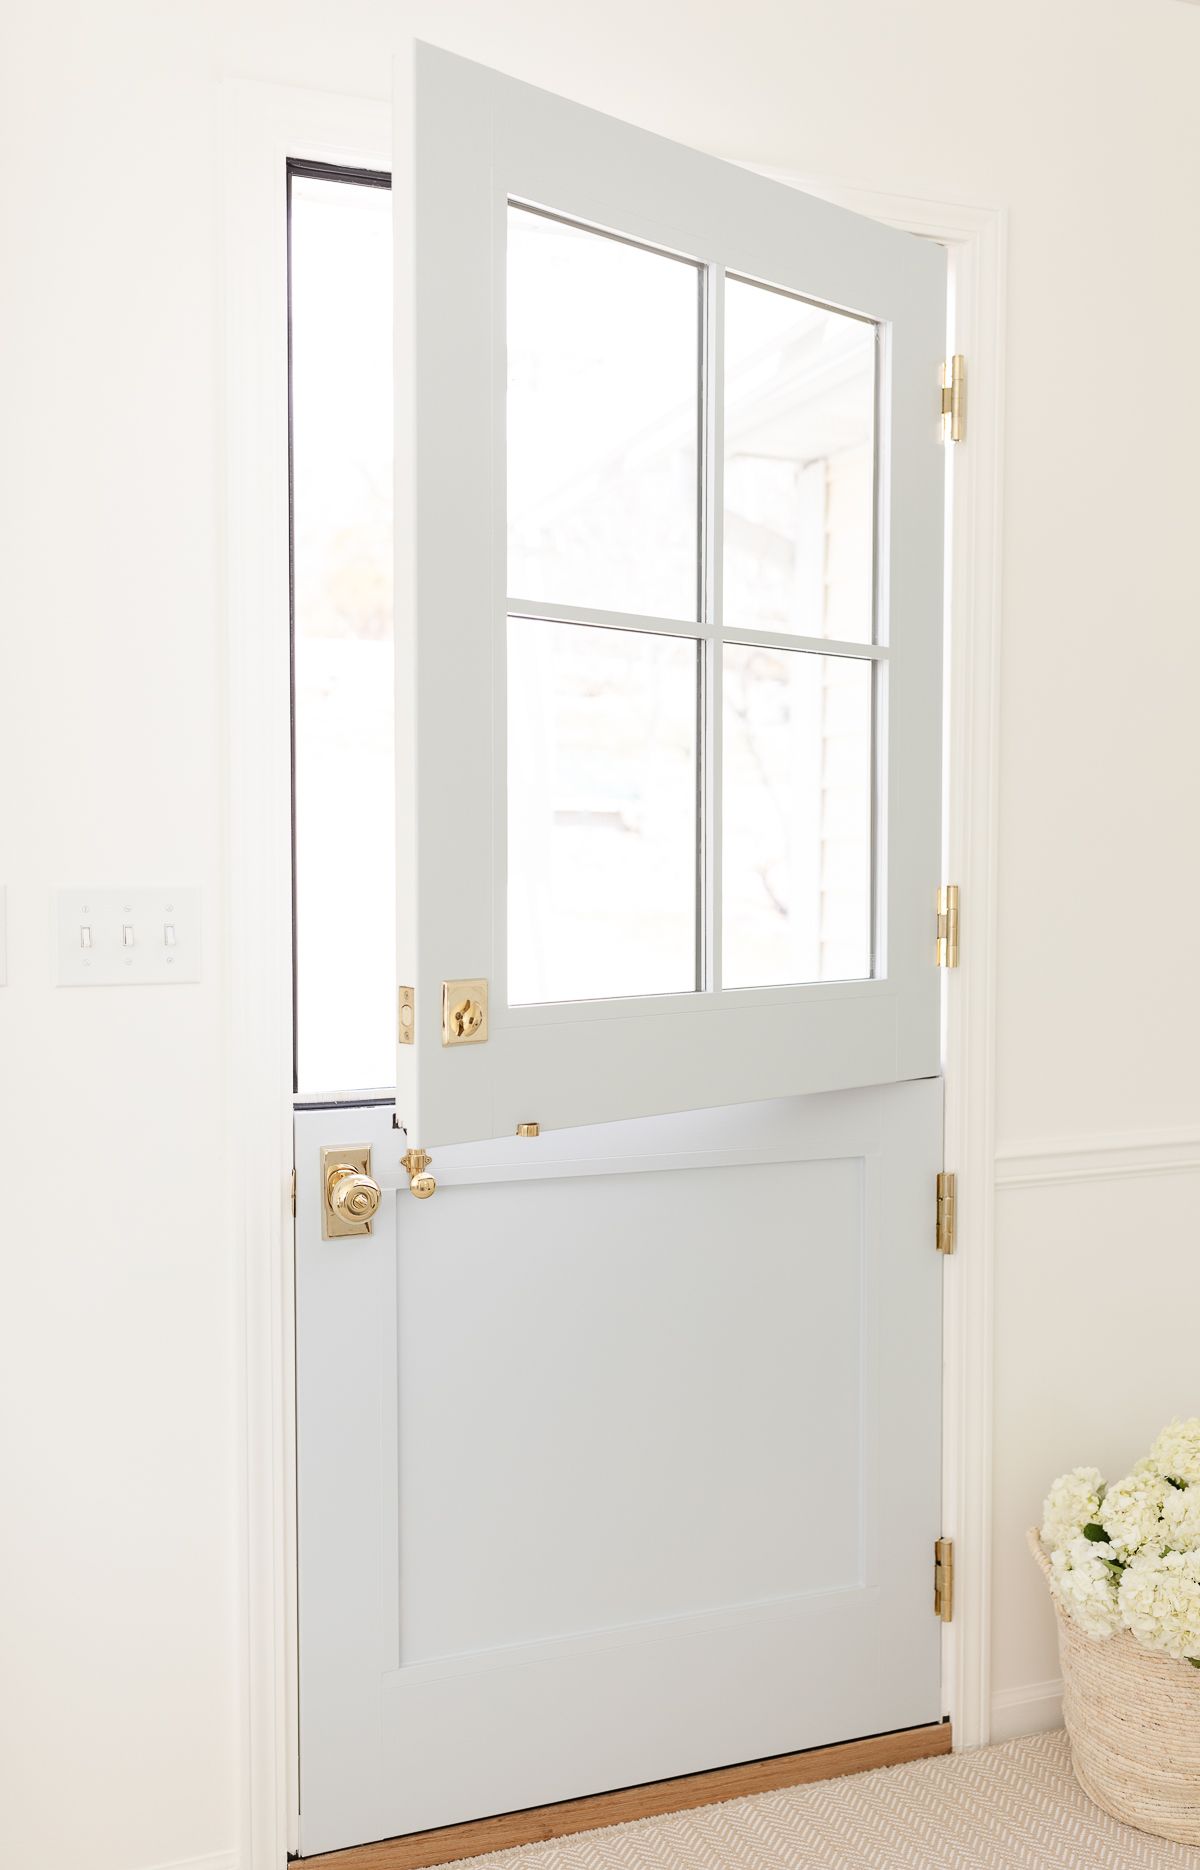 A blue Dutch door with four glass panes on top, looking from the inside out, with brass Dutch door hardware